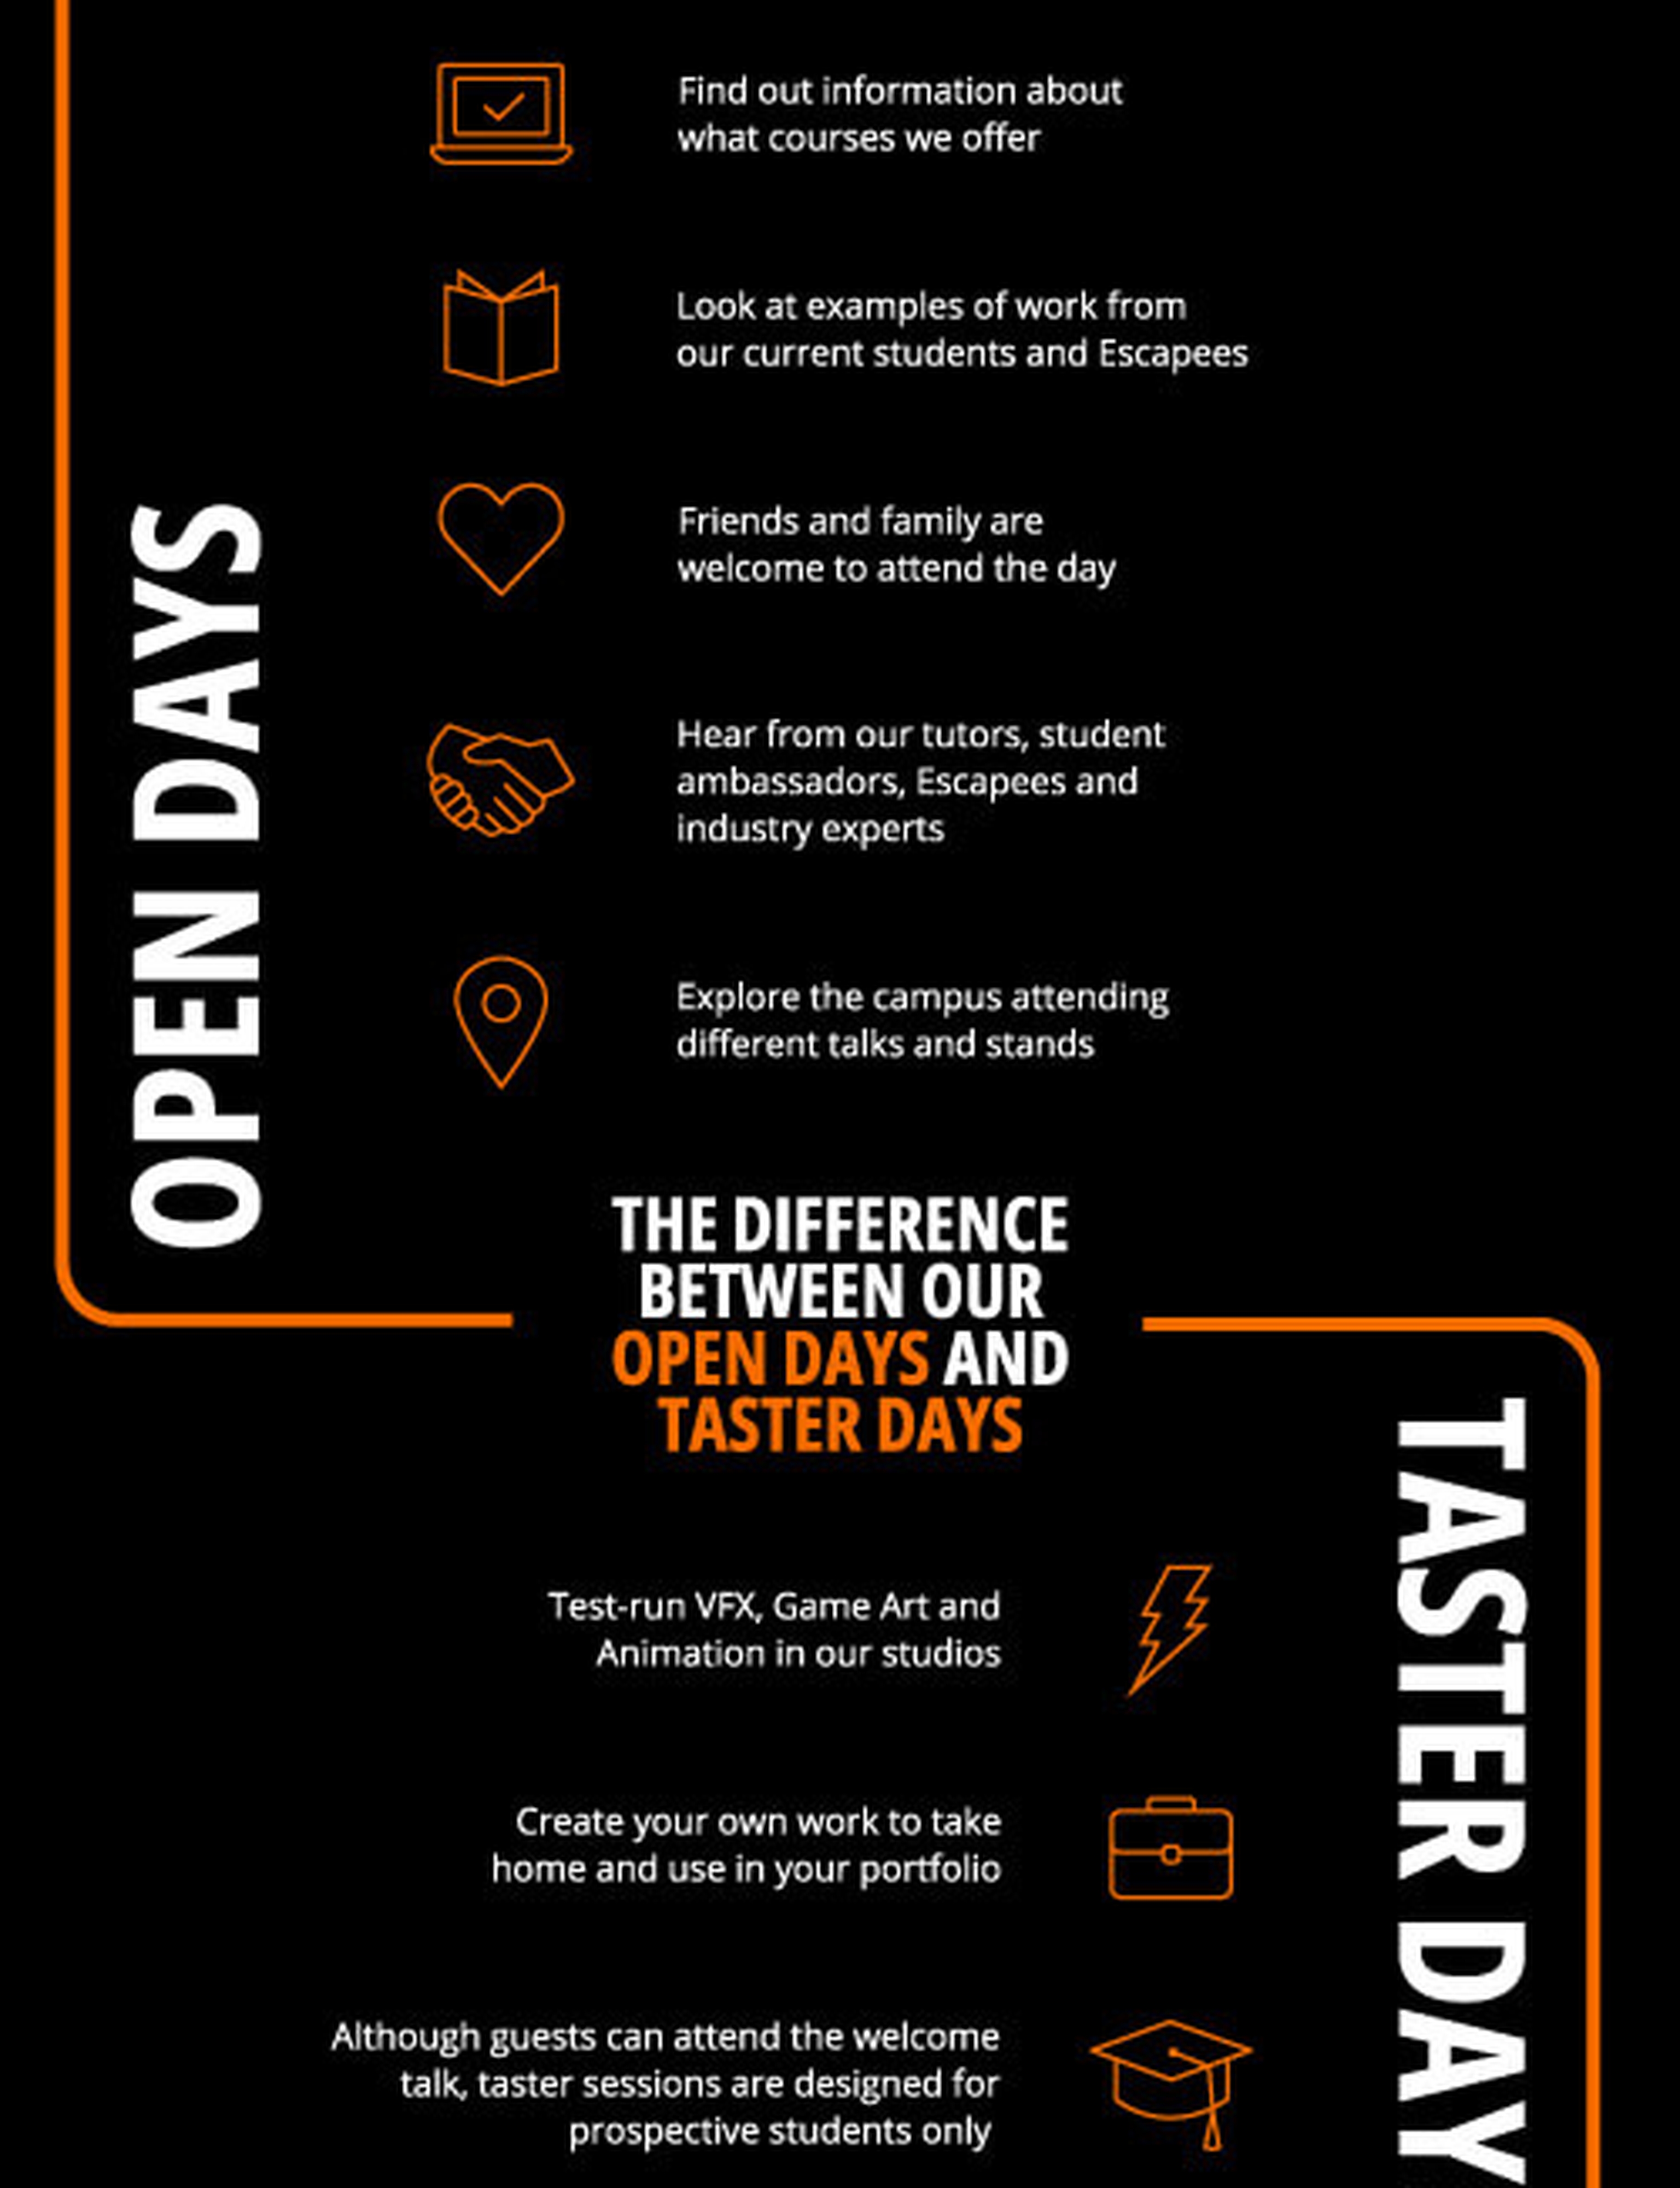 Infographic explaining the differences between open days vs taster days